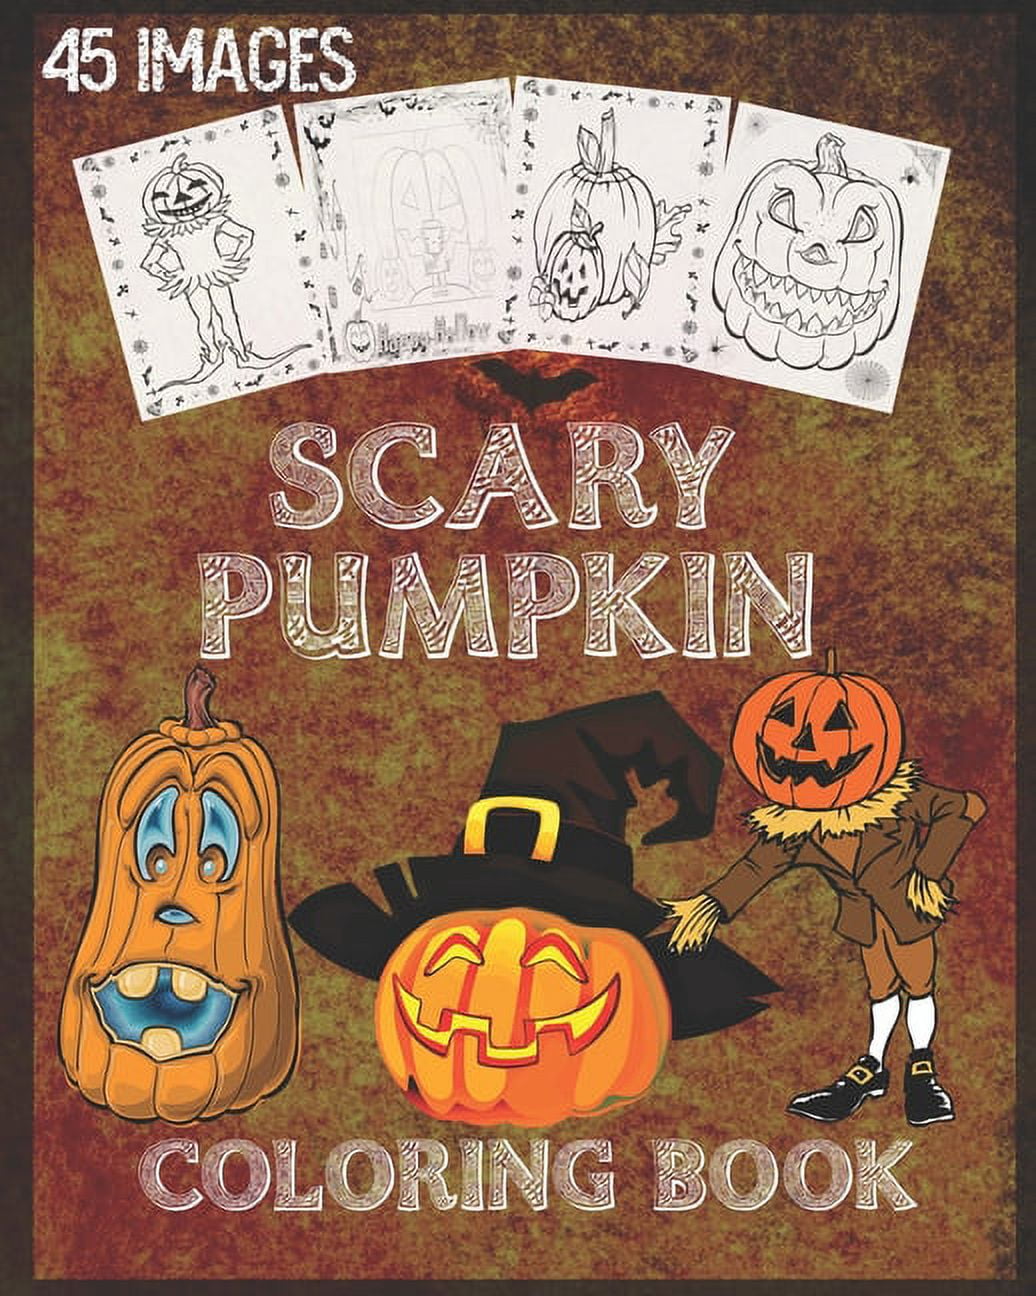 Pumpkin coloring book pumpkin halloween coloring book with scary pumpkins creepy scenes and much more unique single